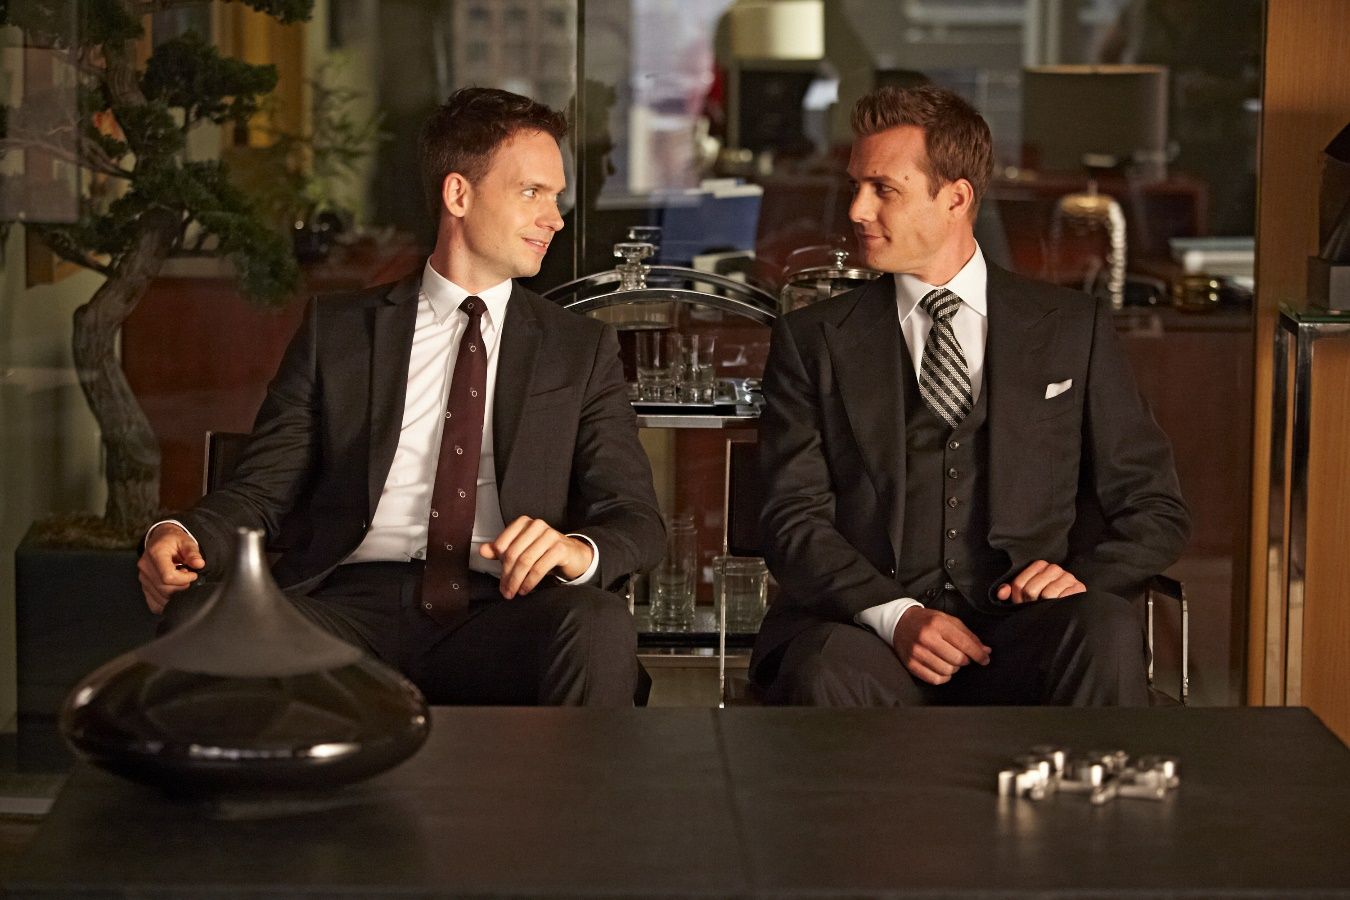 Suits cancelled: What the cast really thought about series finale -  revealed | TV & Radio | Showbiz & TV | Express.co.uk